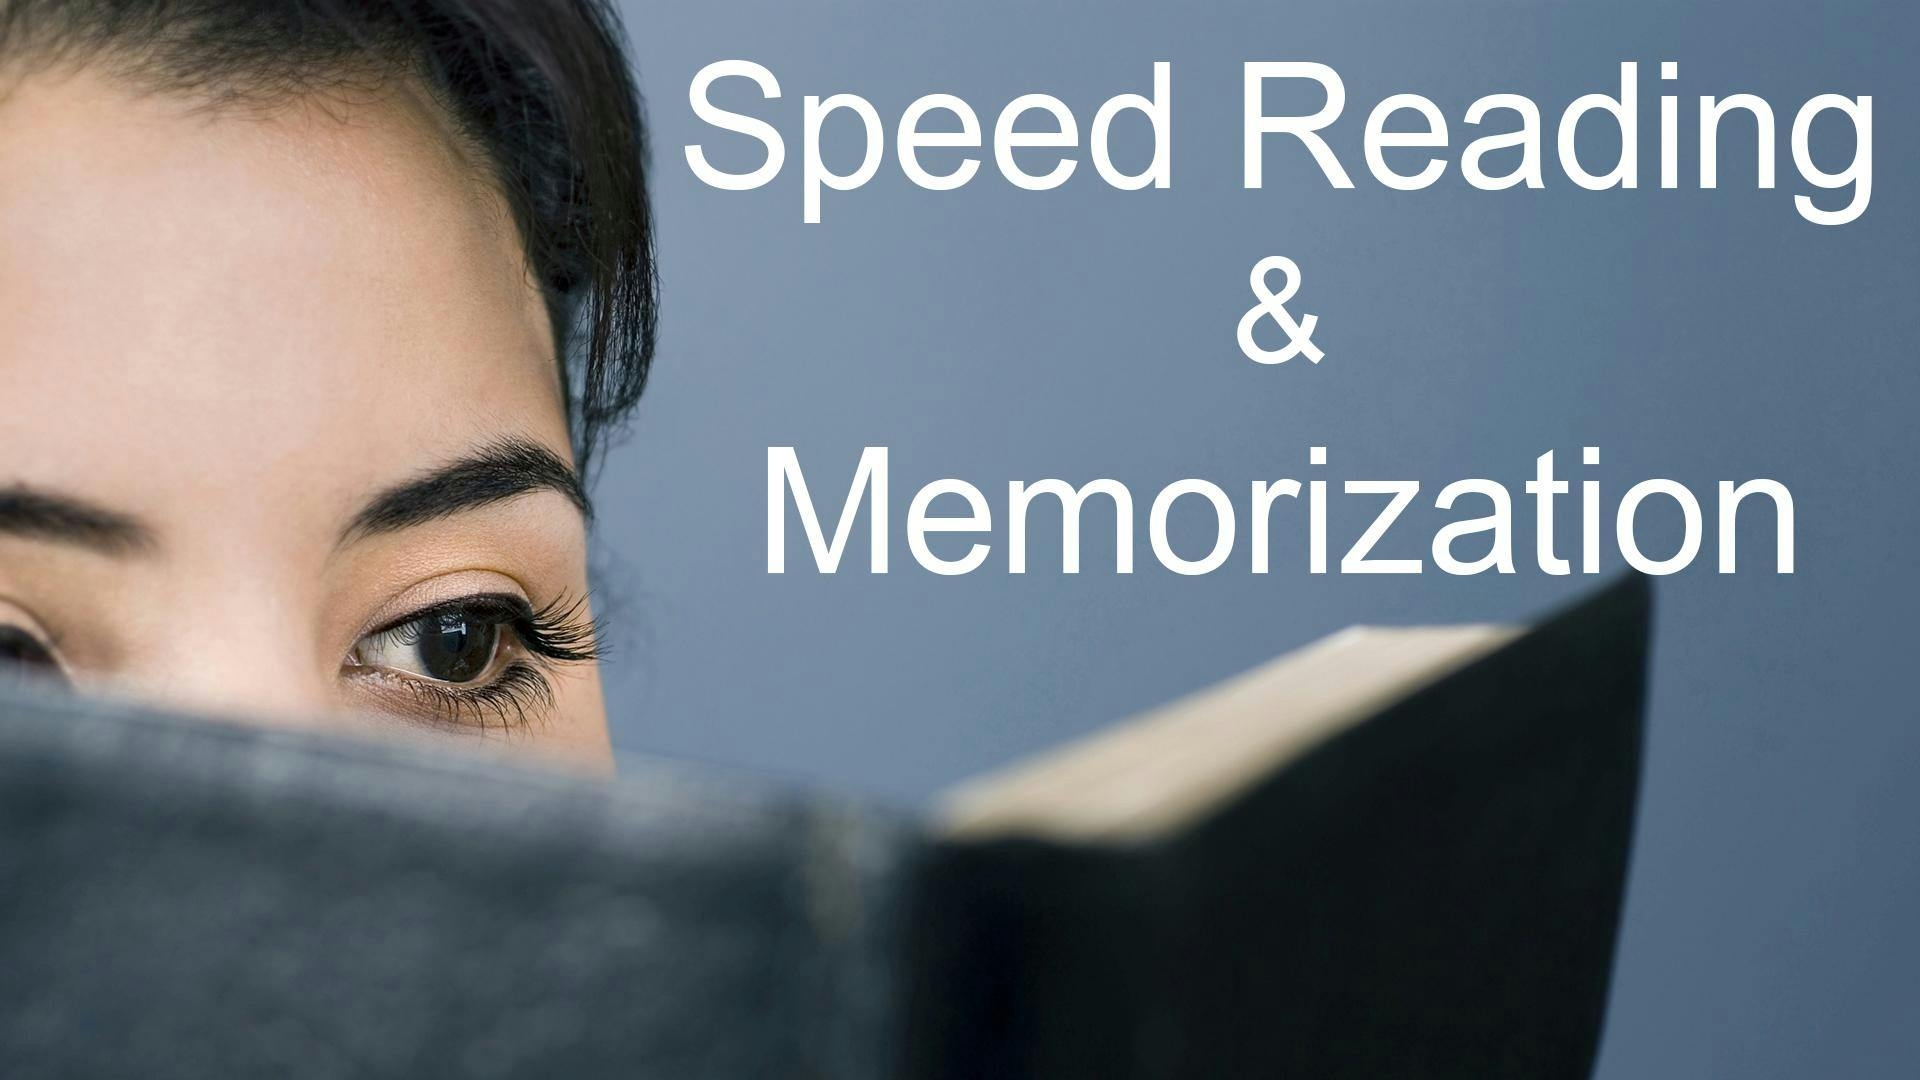 Speed Reading & Memorization Class in Chicago